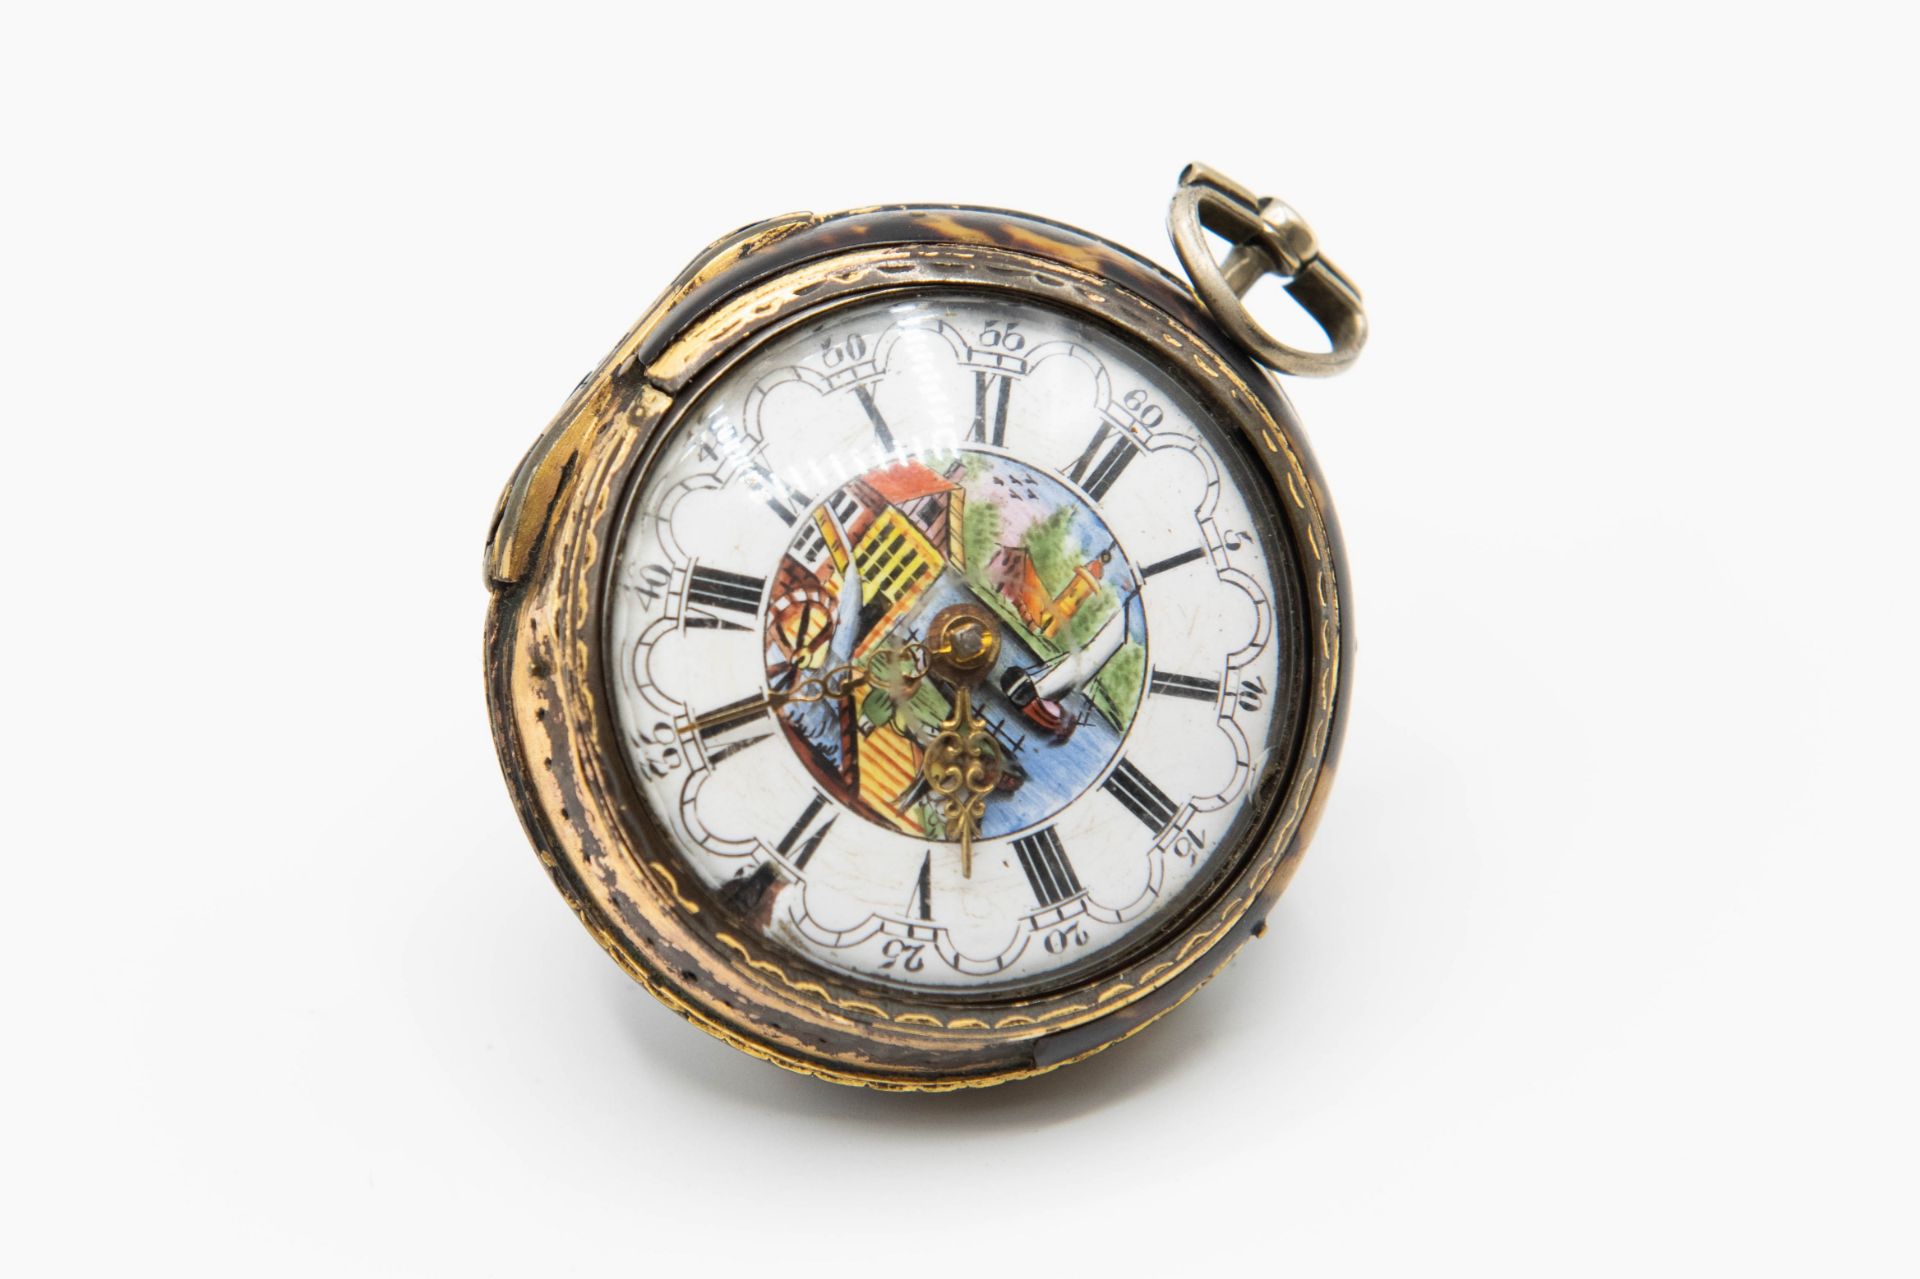 AN 18TH CENTURY PAIR CASED POCKET WATCH